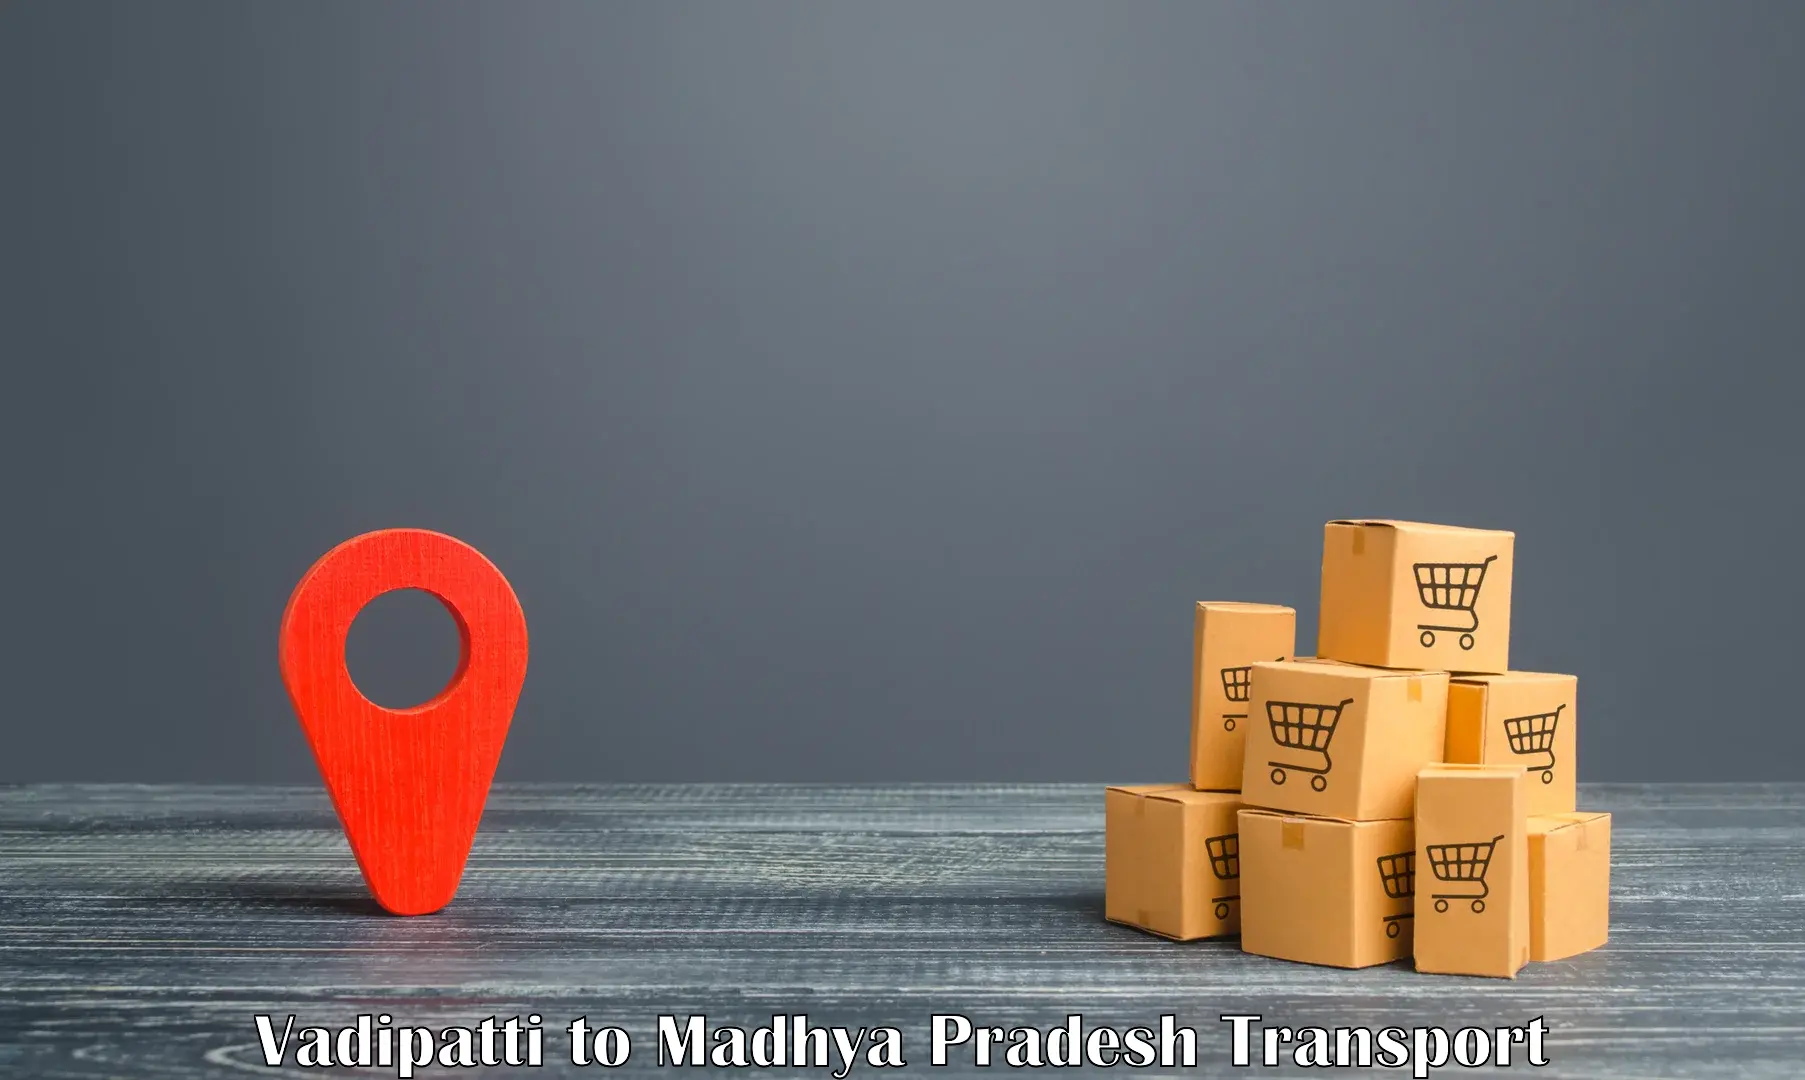 Air freight transport services Vadipatti to Indore